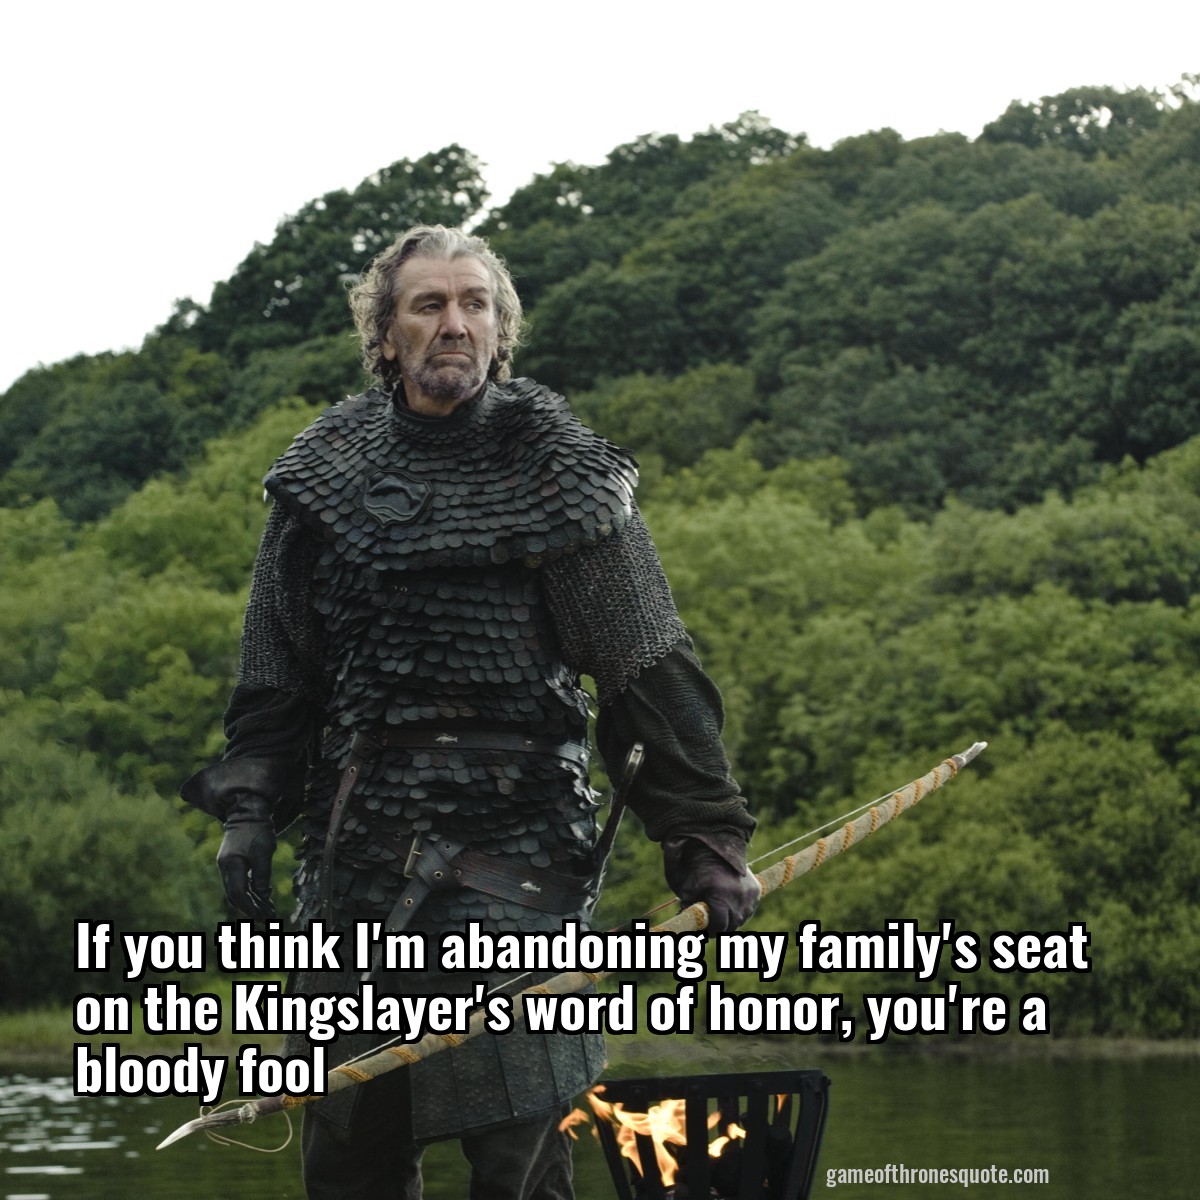 If you think I'm abandoning my family's seat on the Kingslayer's word of honor, you're a bloody fool